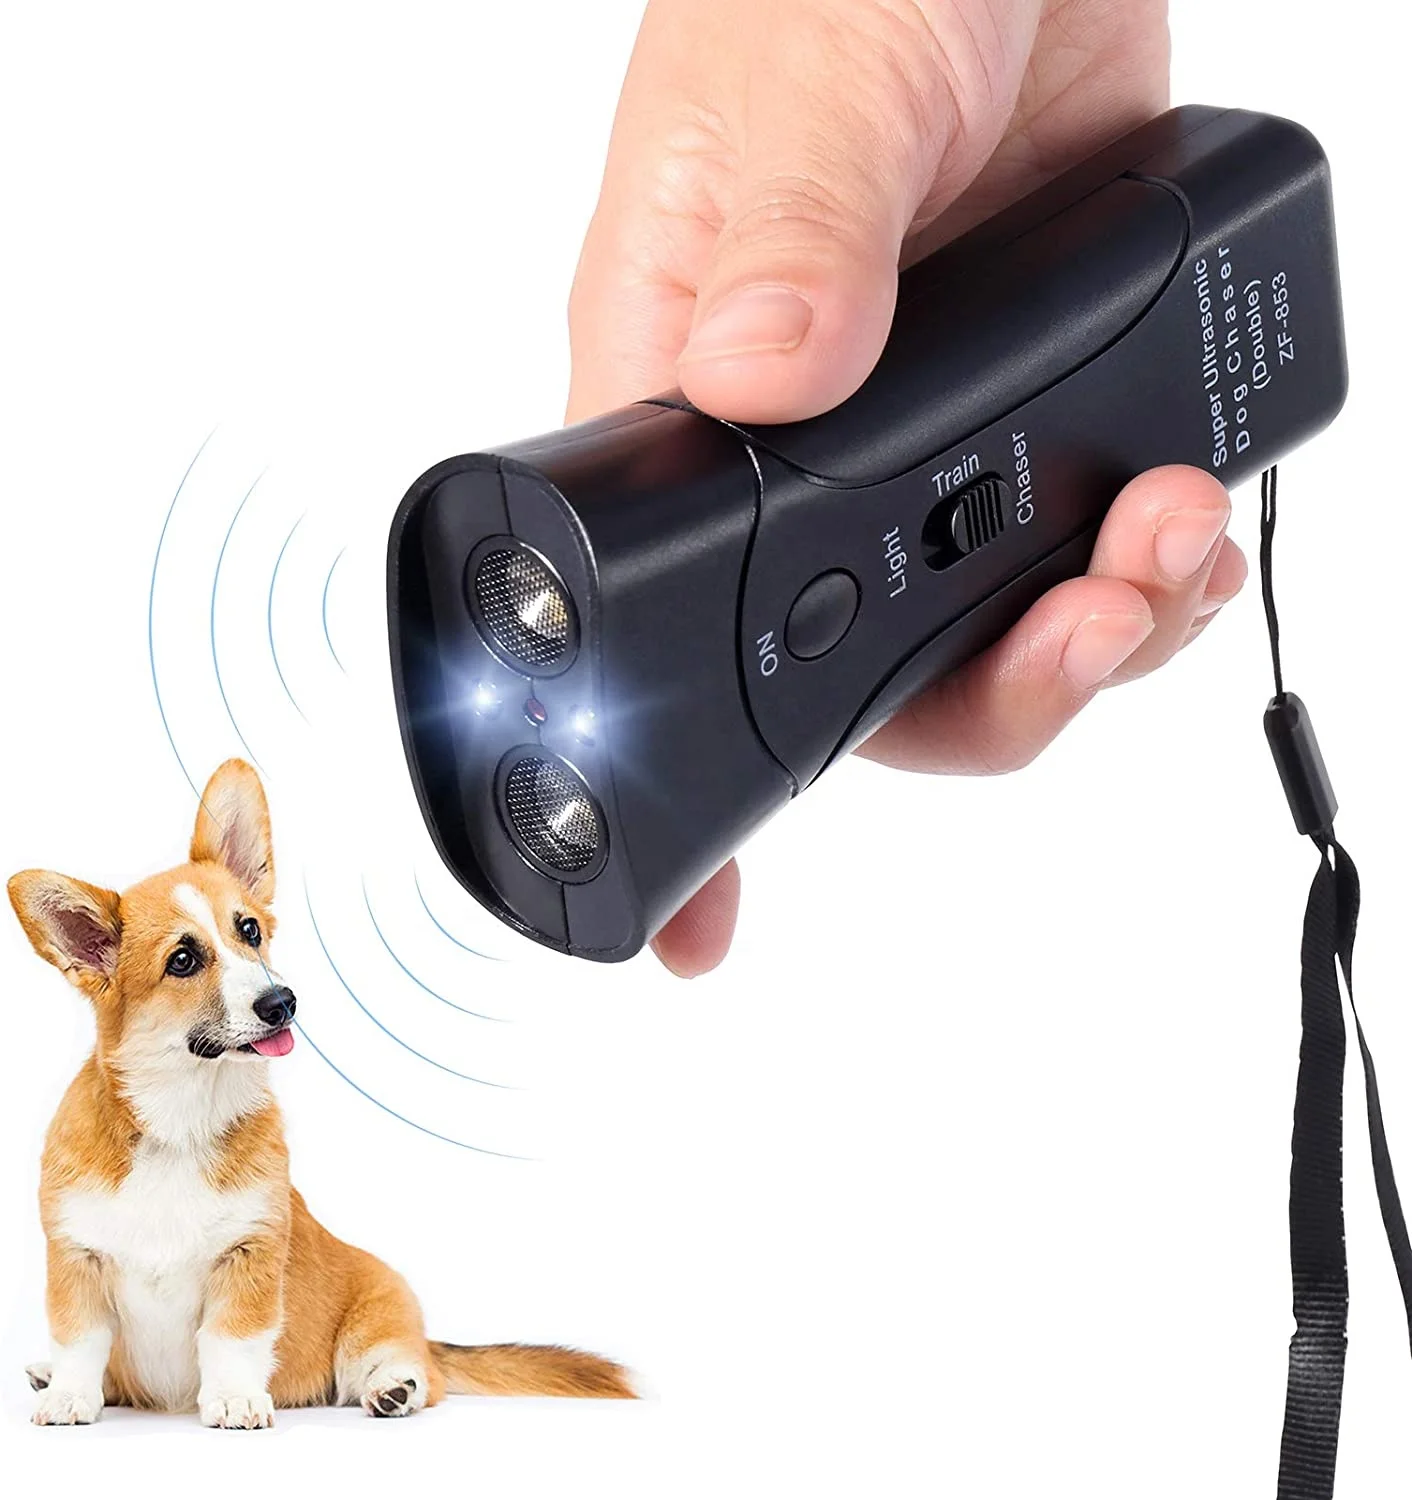 

Handheld Double Lamp Anti Barking Stop Bark Dog Trainer Ultrasonic Dog Repeller And Trainer Device No Barking Collar